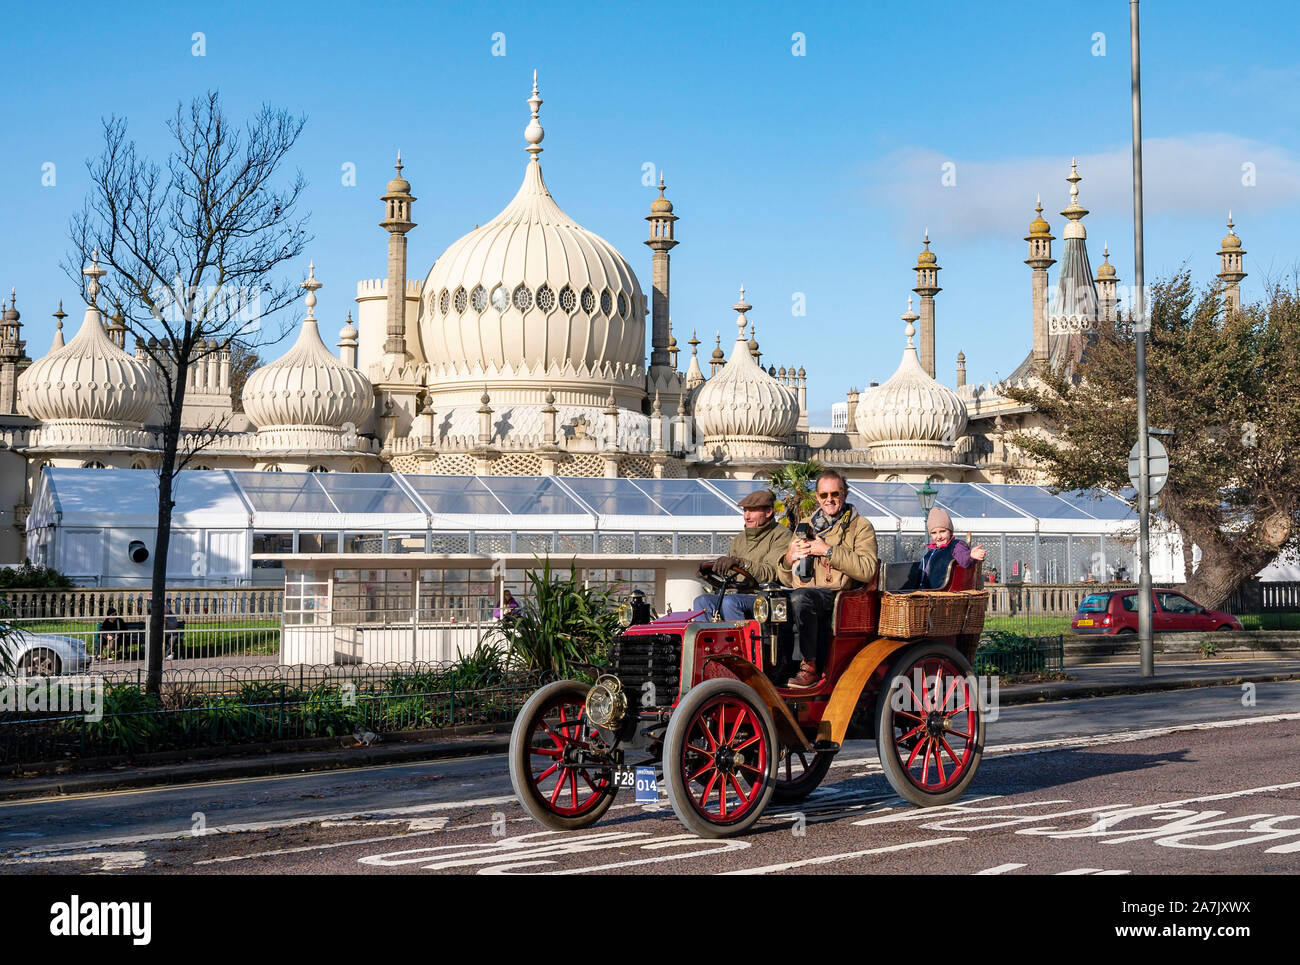 Brighton UK 3rd November 2019 - A 1898 Panhard et Levassor owned by Jonathan Procter passes by the Royal Pavilion in Brighton as it nears the finish of the Bonhams London to Brighton Veteran Car Run. Over 400 pre-1905 cars set off from Hyde Park London early this morning and finish at Brighton's Madeira Drive on the seafront : Credit Simon Dack / Alamy Live News Stock Photo